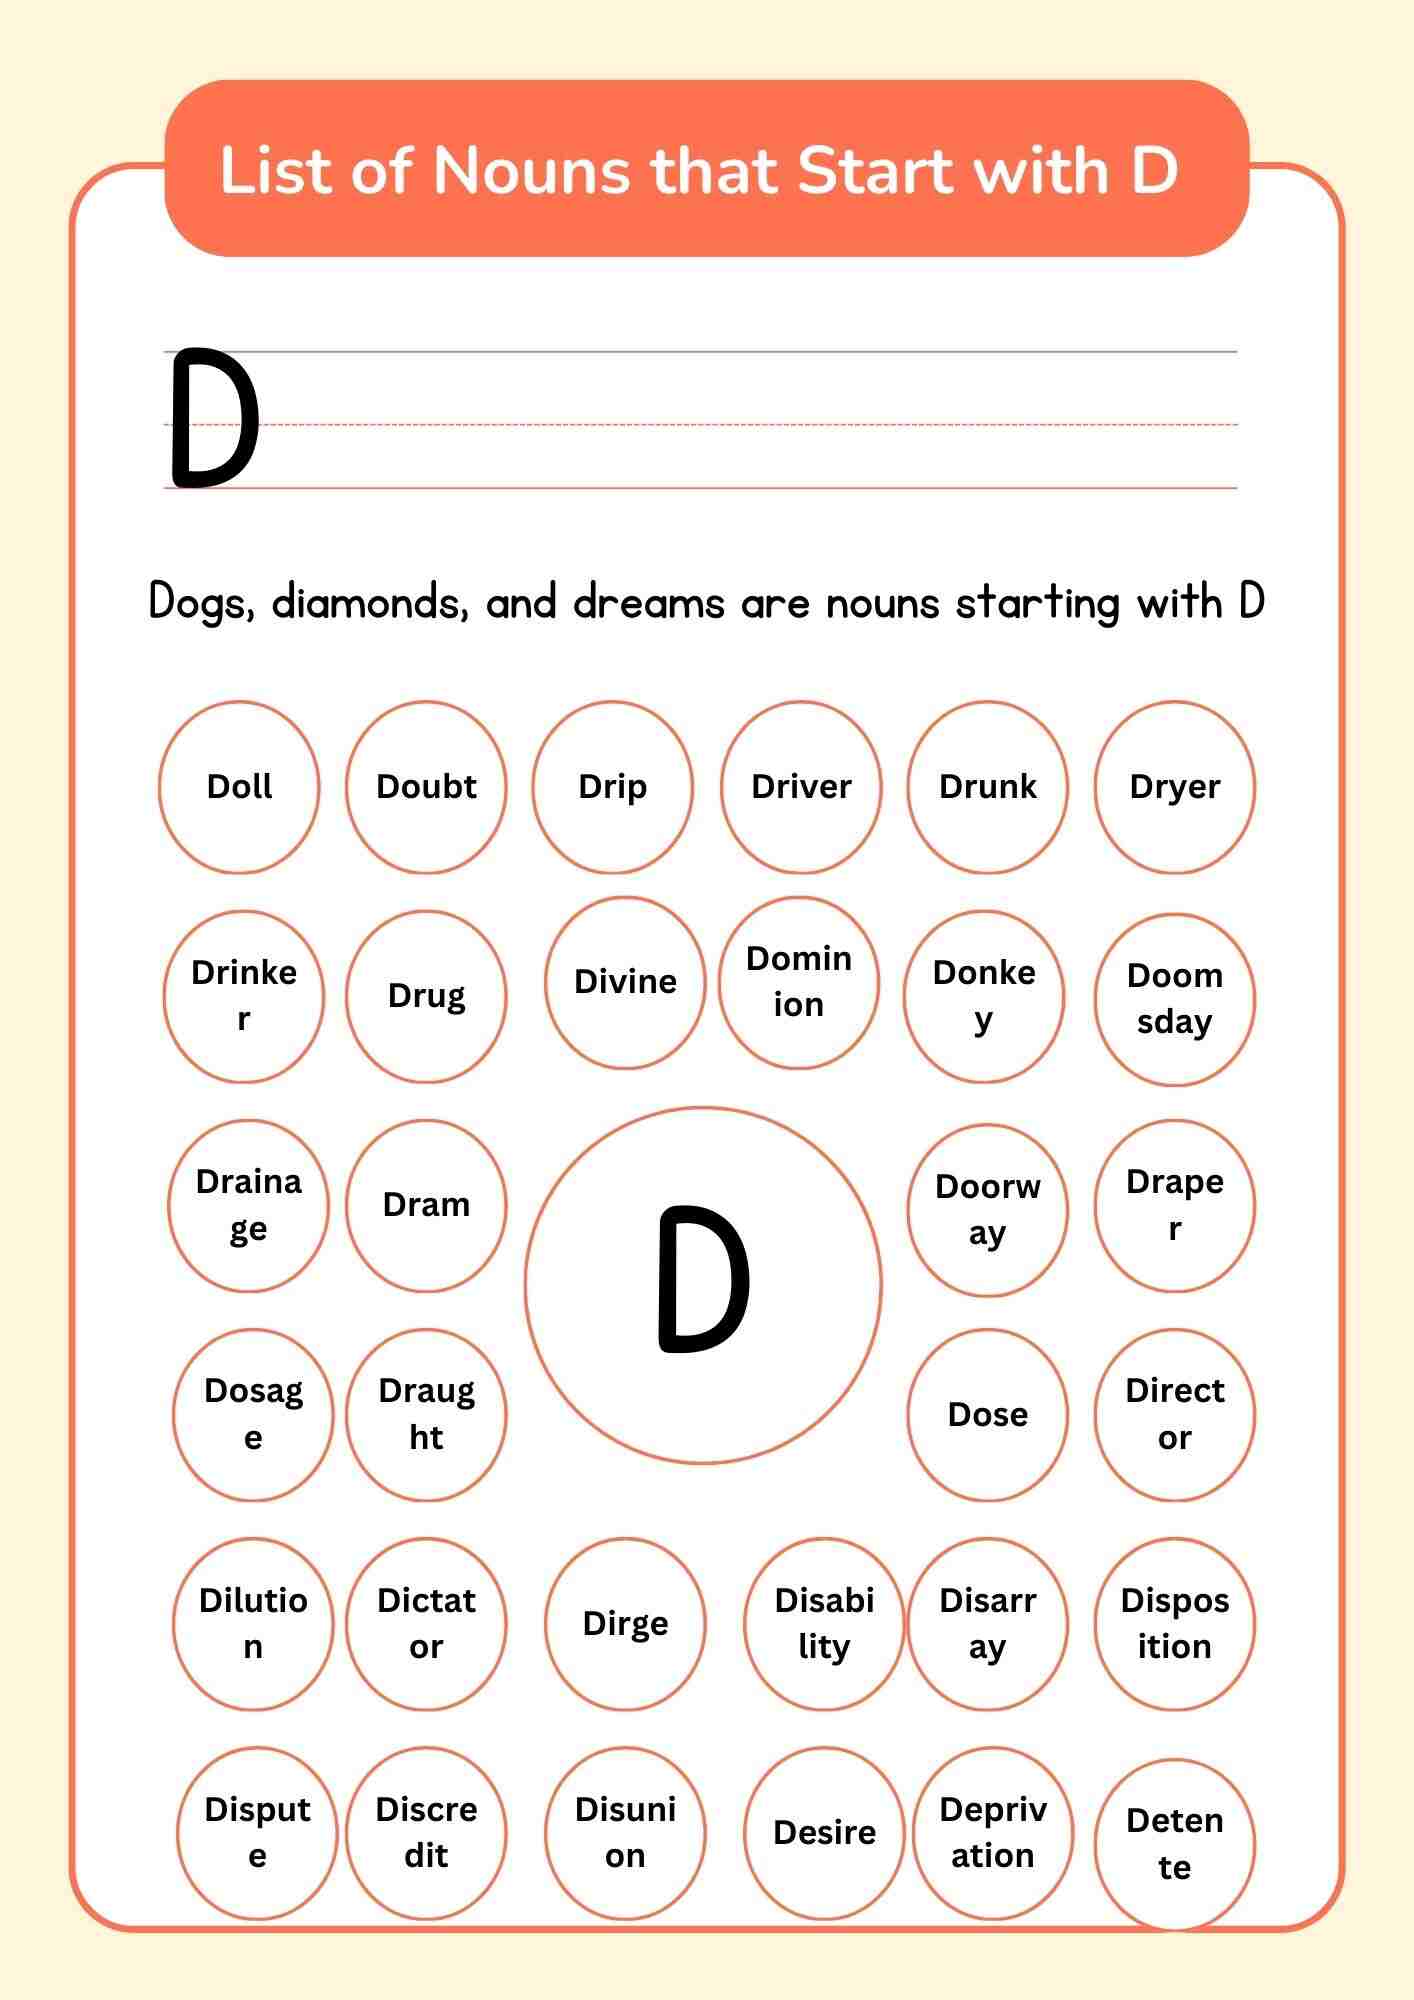 Nouns that Start with D